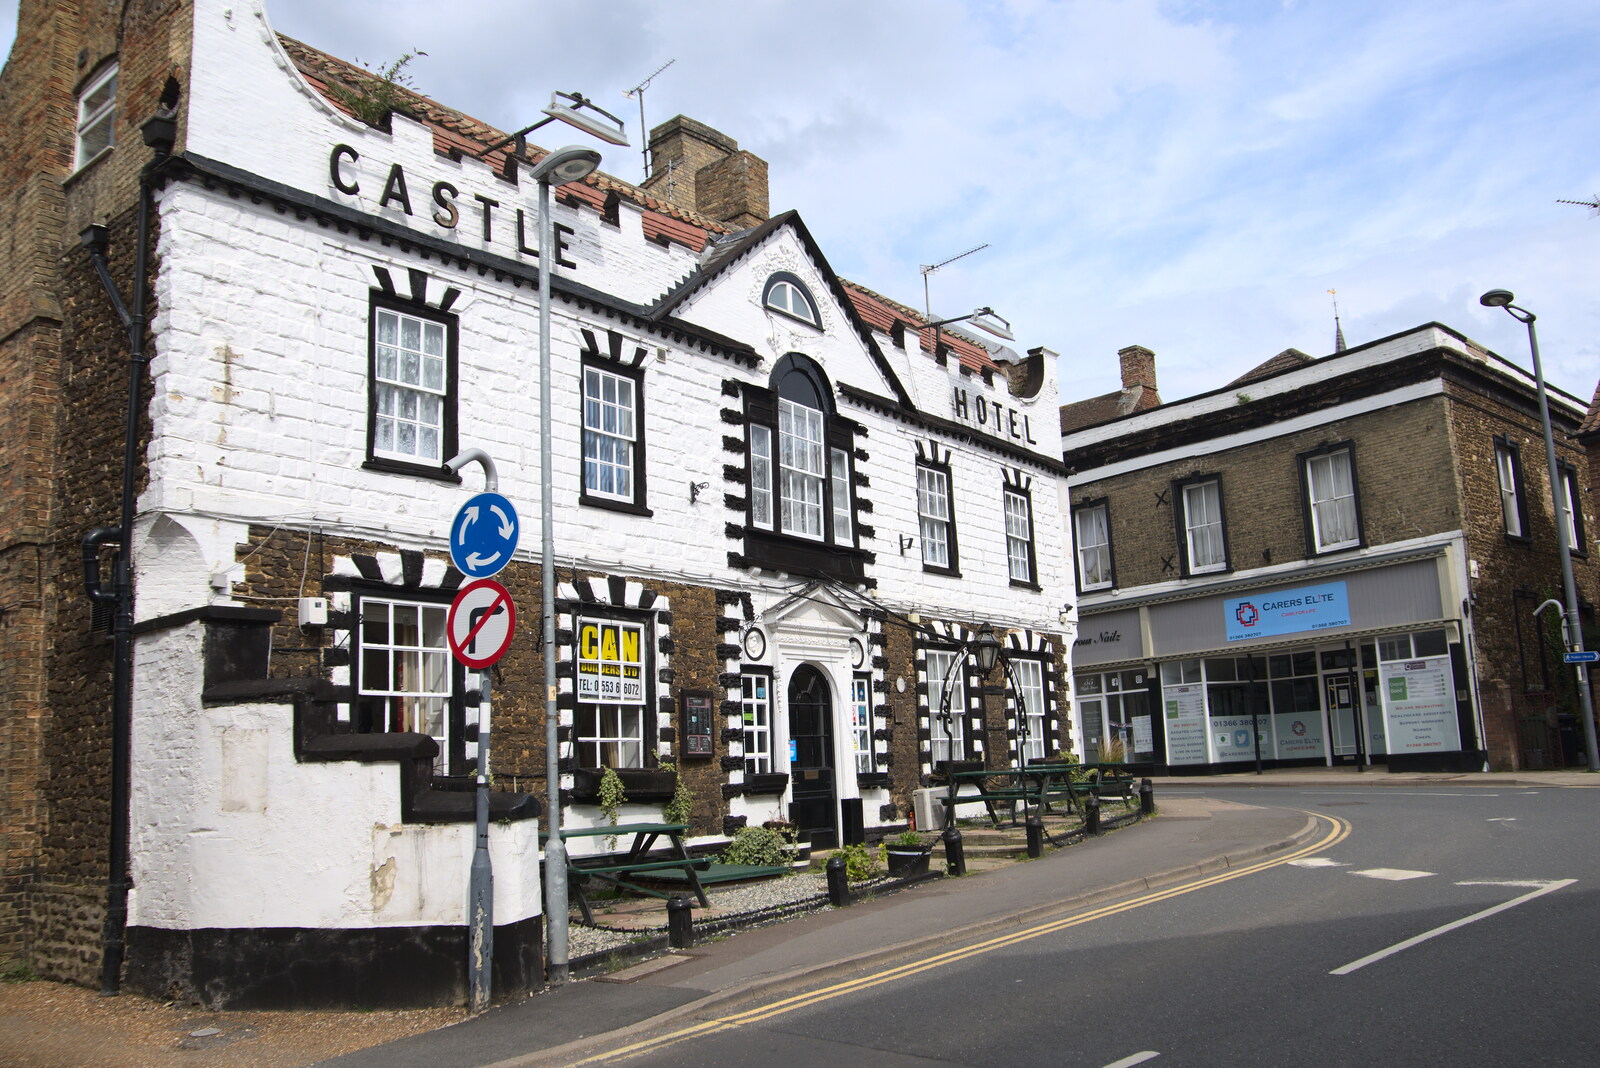 The vacant Castle Hotel from A Vaccination Afternoon, Swaffham, Norfolk - 9th May 2021